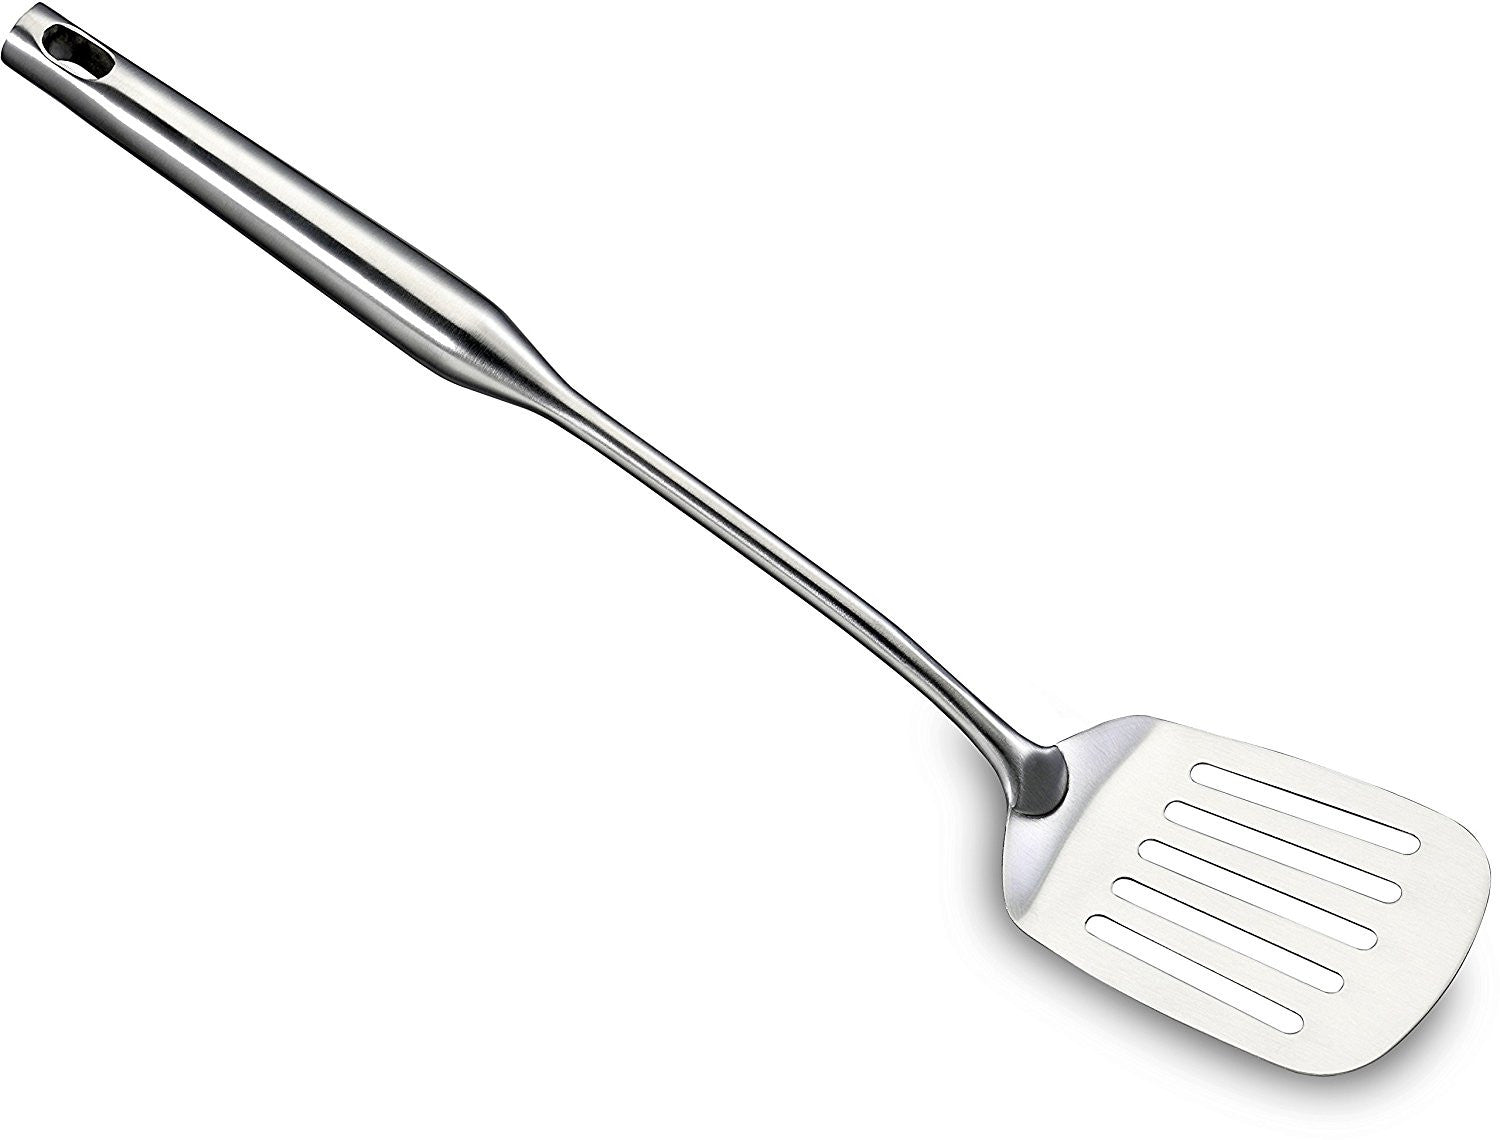 Metal Spatula - Fish Turner And Burger Barbecue Grill Spatula - Pancake  Flipper Egg Griddle Bbq Wok - Heavy Duty Commercial Restaurant Quality  Stainless Steel Serving Utensils by Pro Chef Kitchen Tools –